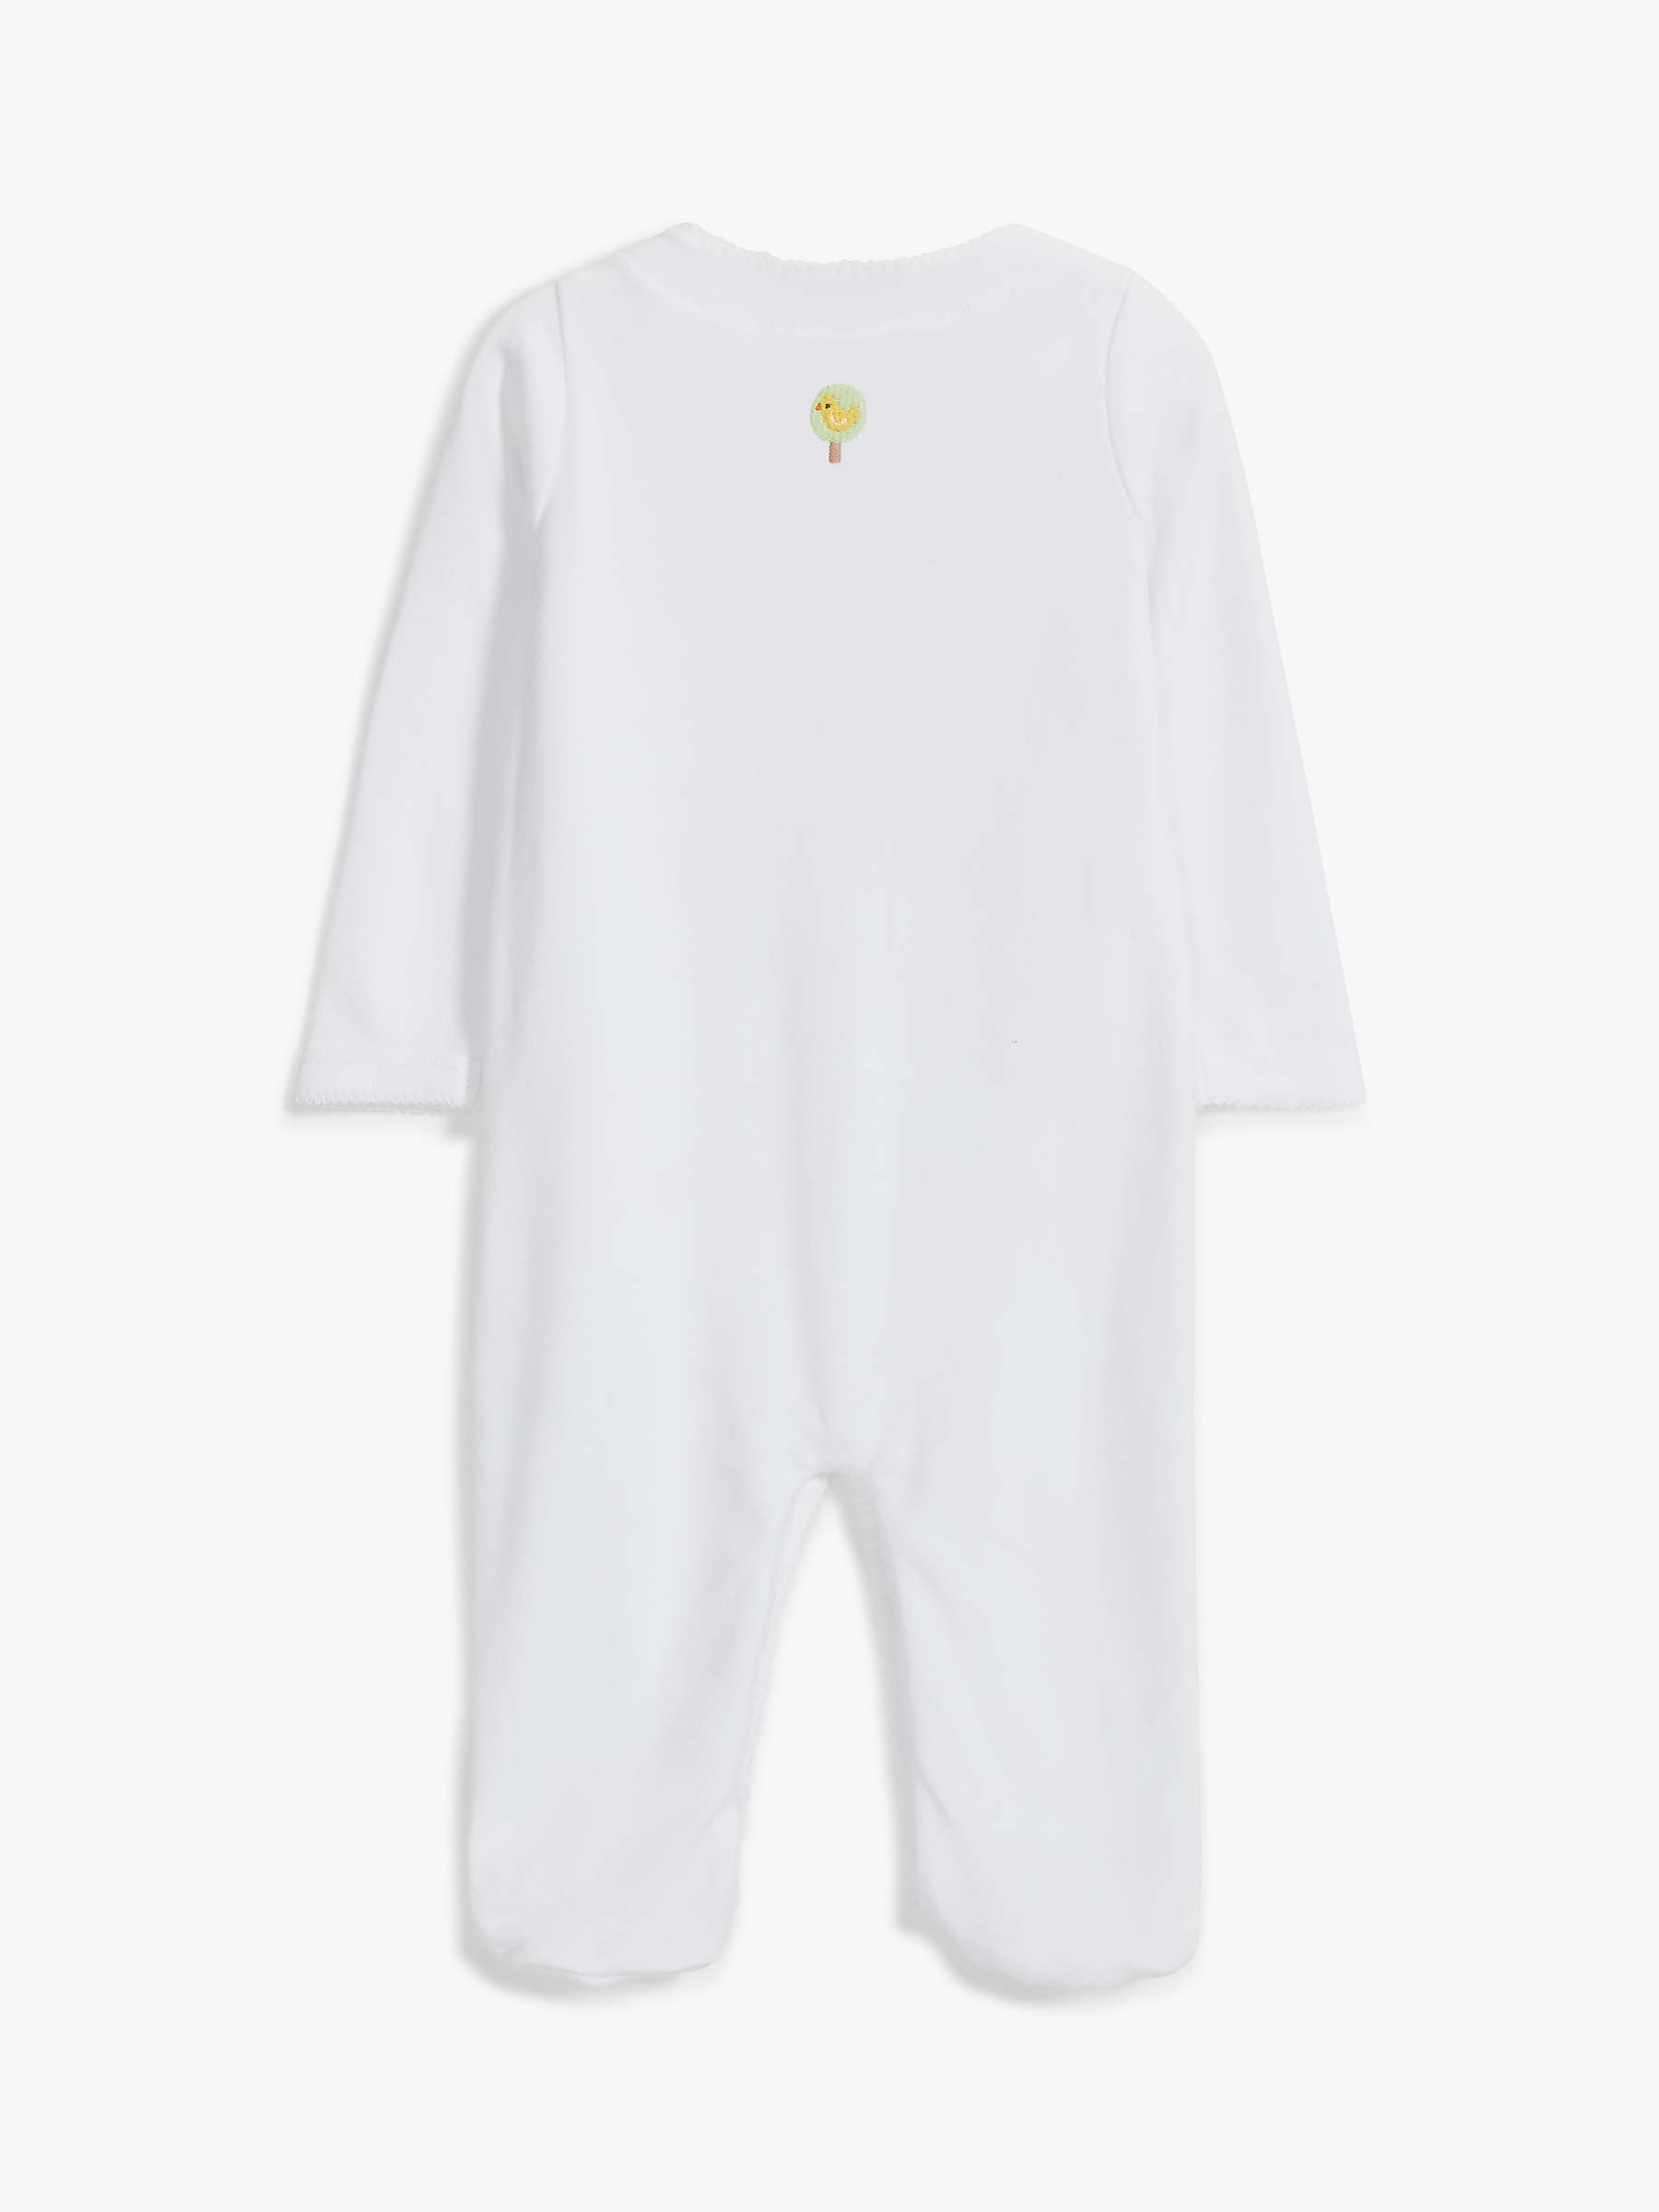 Buy John Lewis Heirloom Collection Baby Woodland Animals Embroidered Sleepsuit, White Online at johnlewis.com